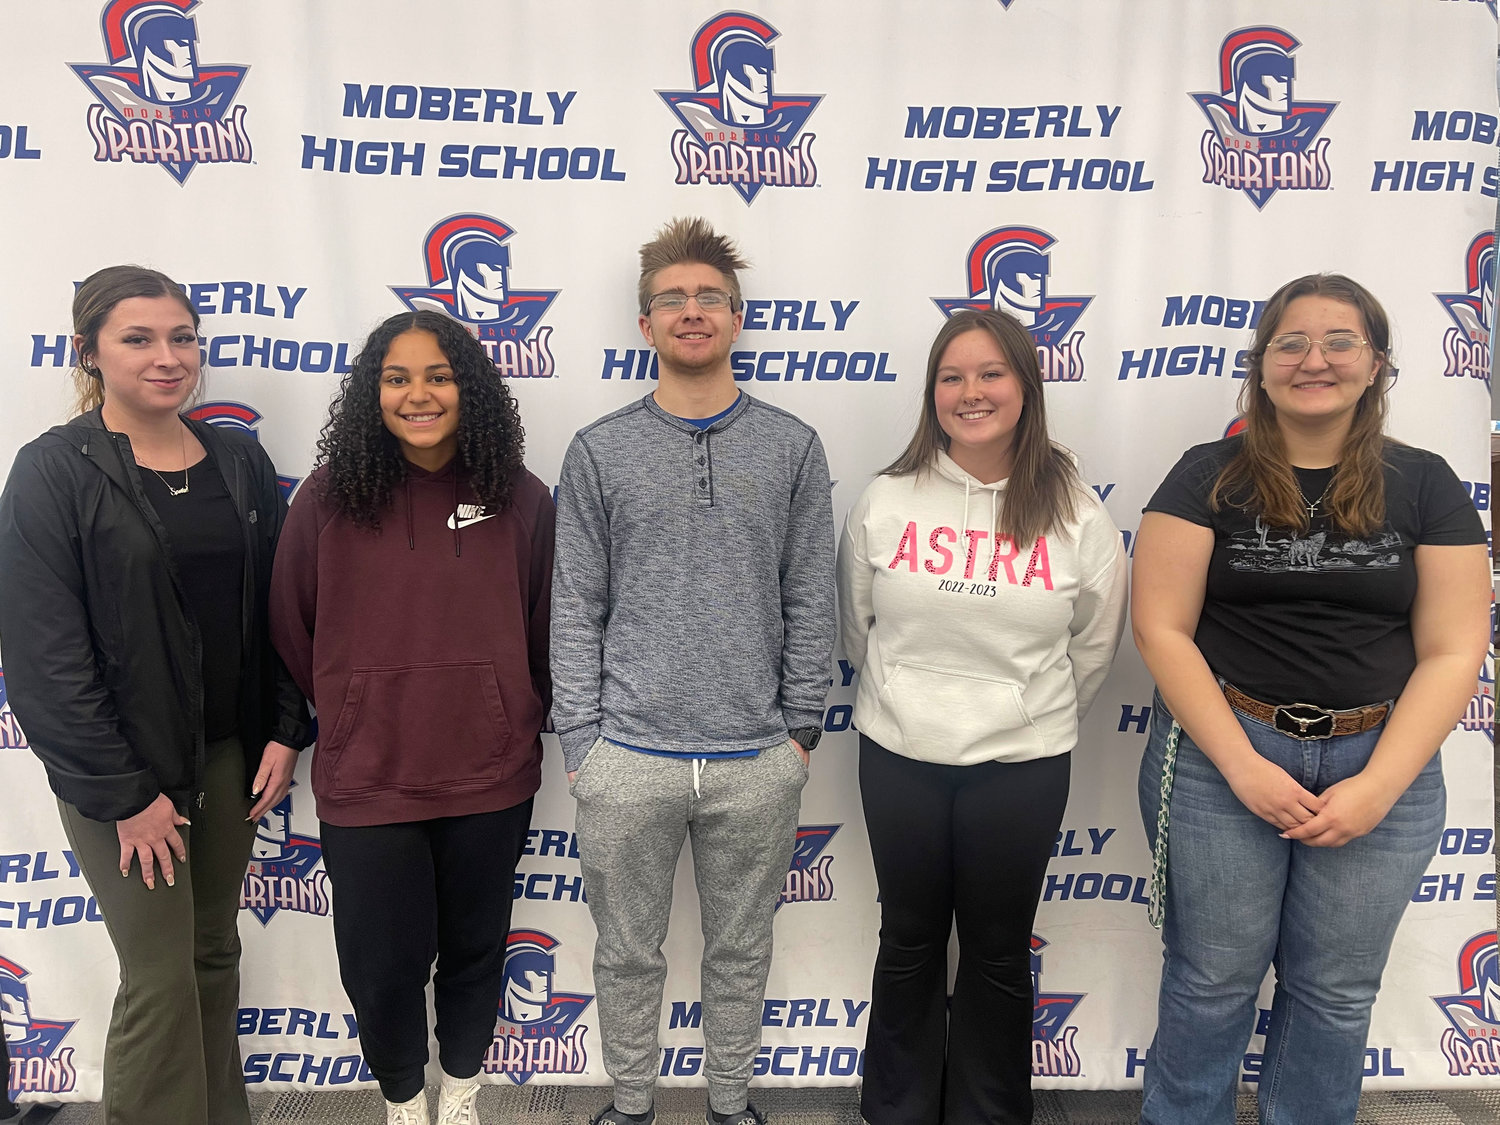 Moberly High School students who received Dual Credit Scholarships from the United Way are, from left, Gracelynn Auberlin, Reanna Woods-Bloss, Nate Weant, Jade Mickle and Jenna Wright. Hallie Kroner is not pictured.